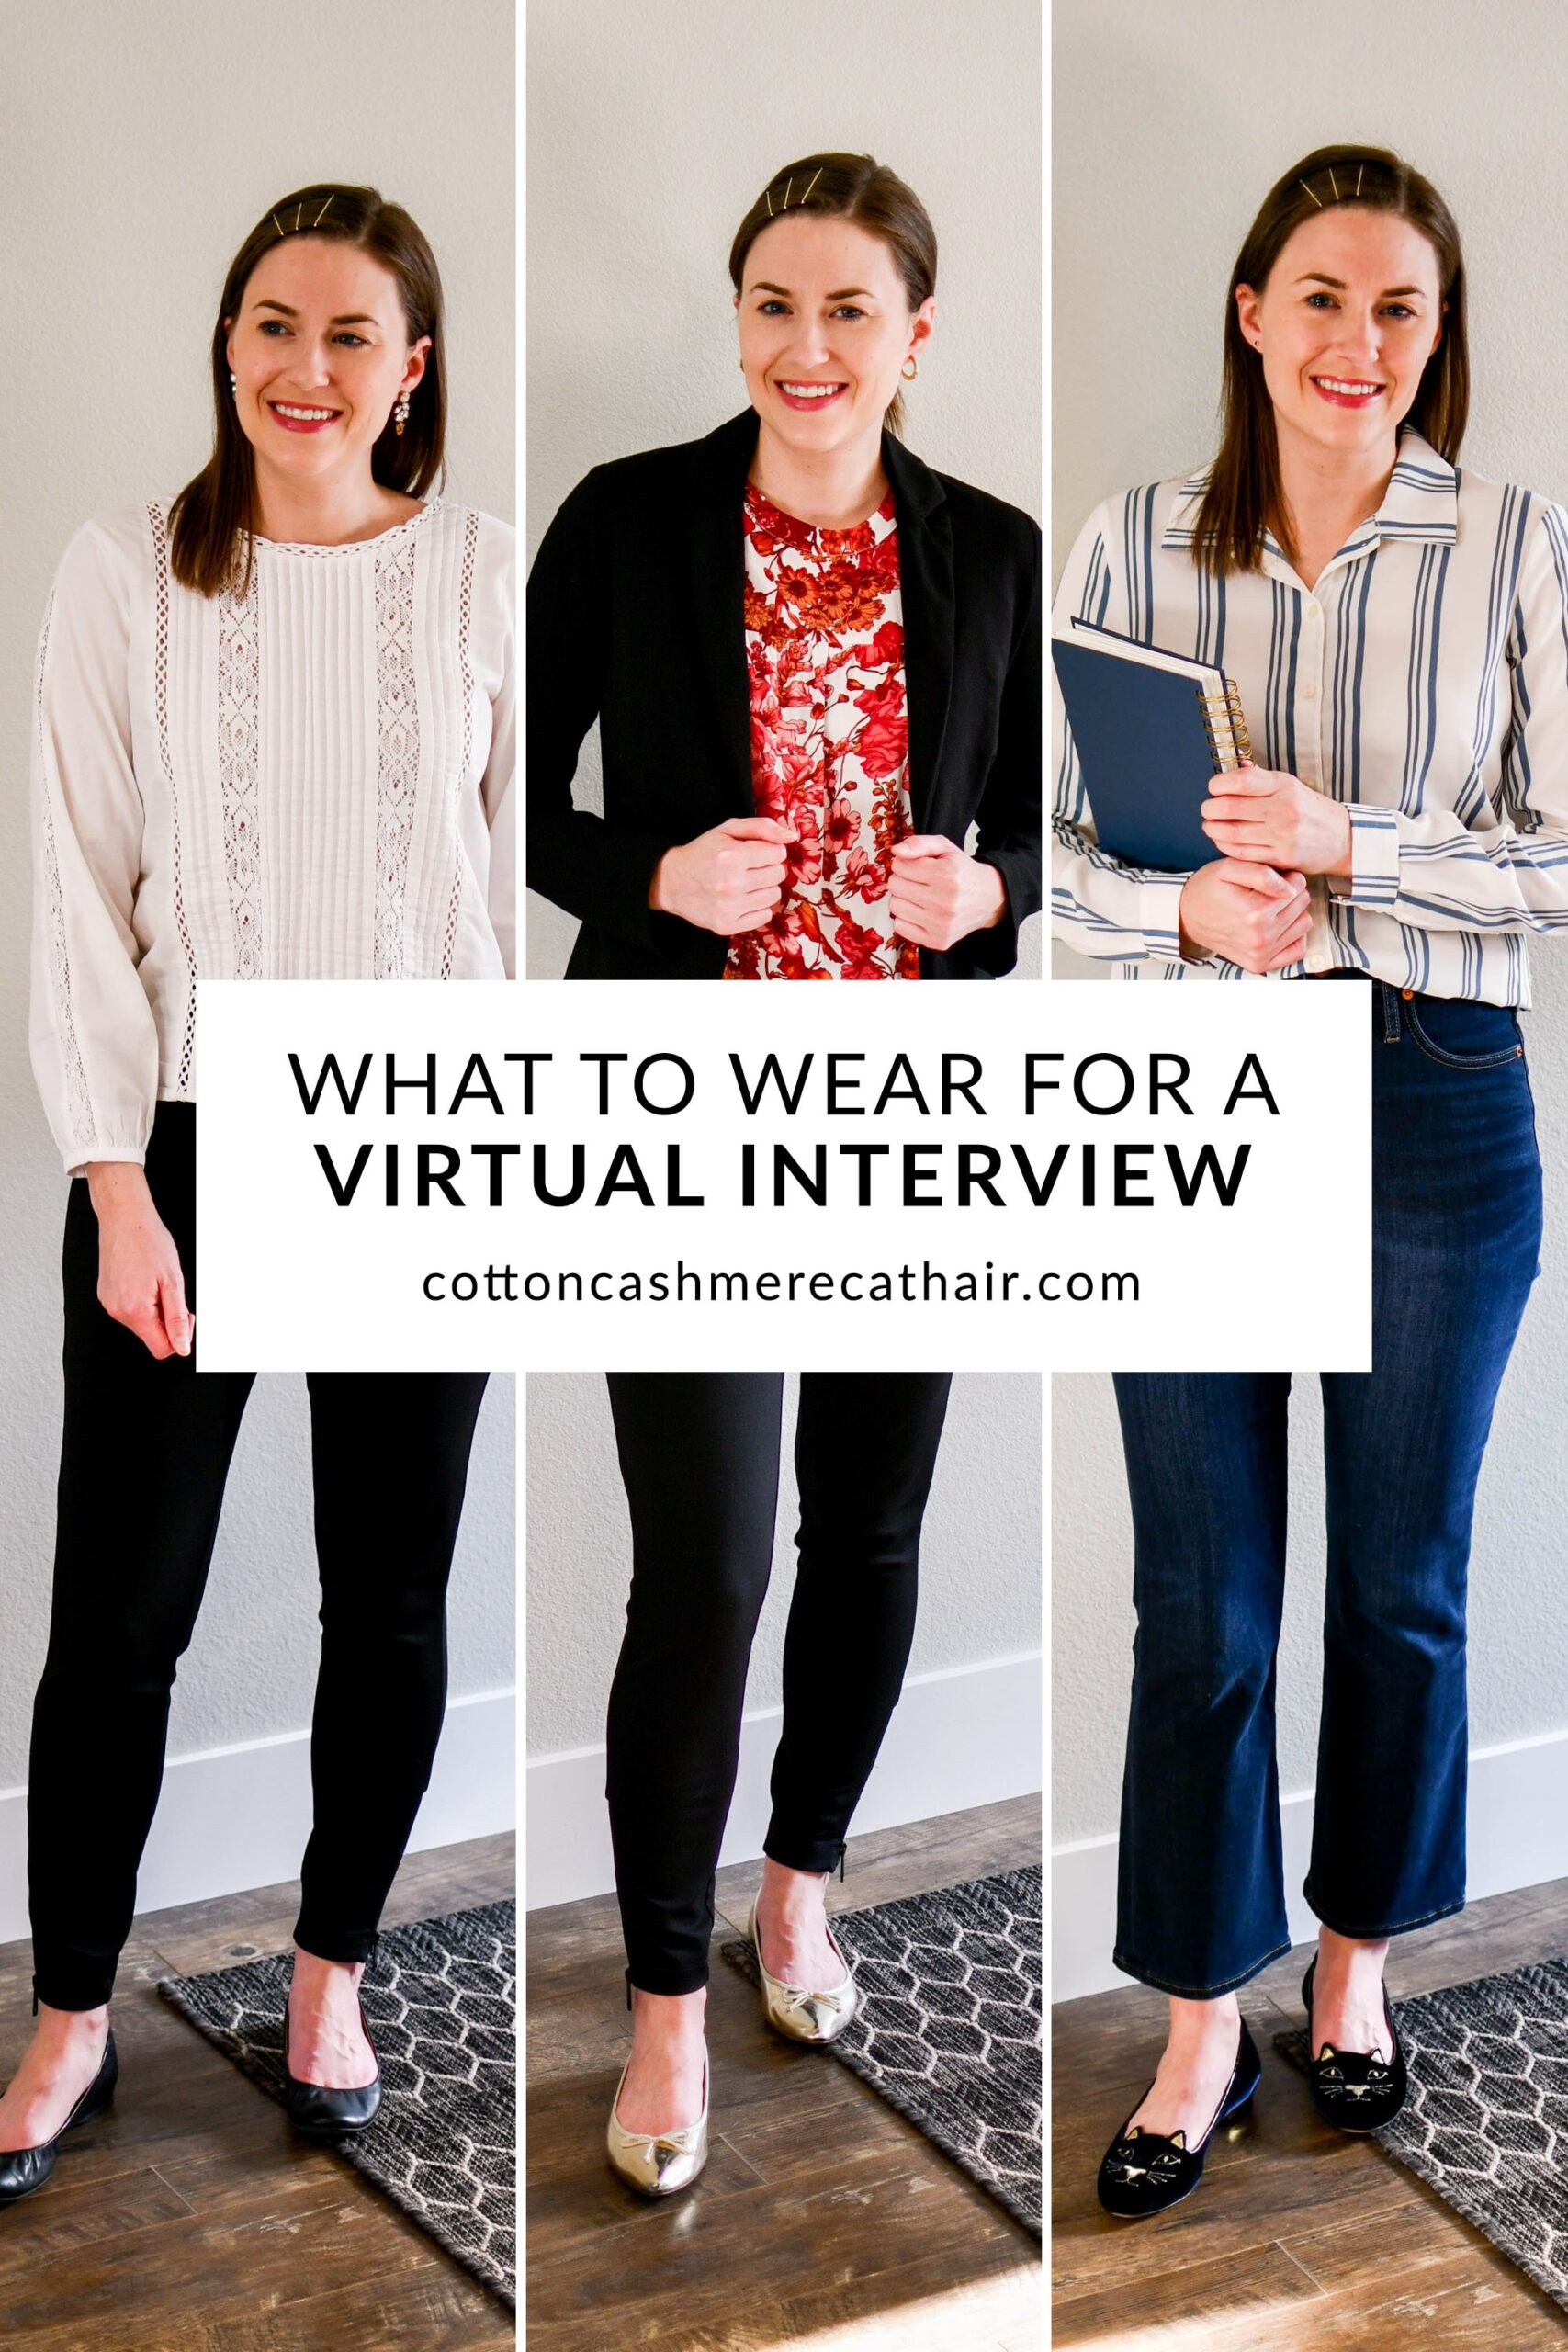 WHAT TO WEAR FOR A VIRTUAL INTERVIEW ON ZOOM